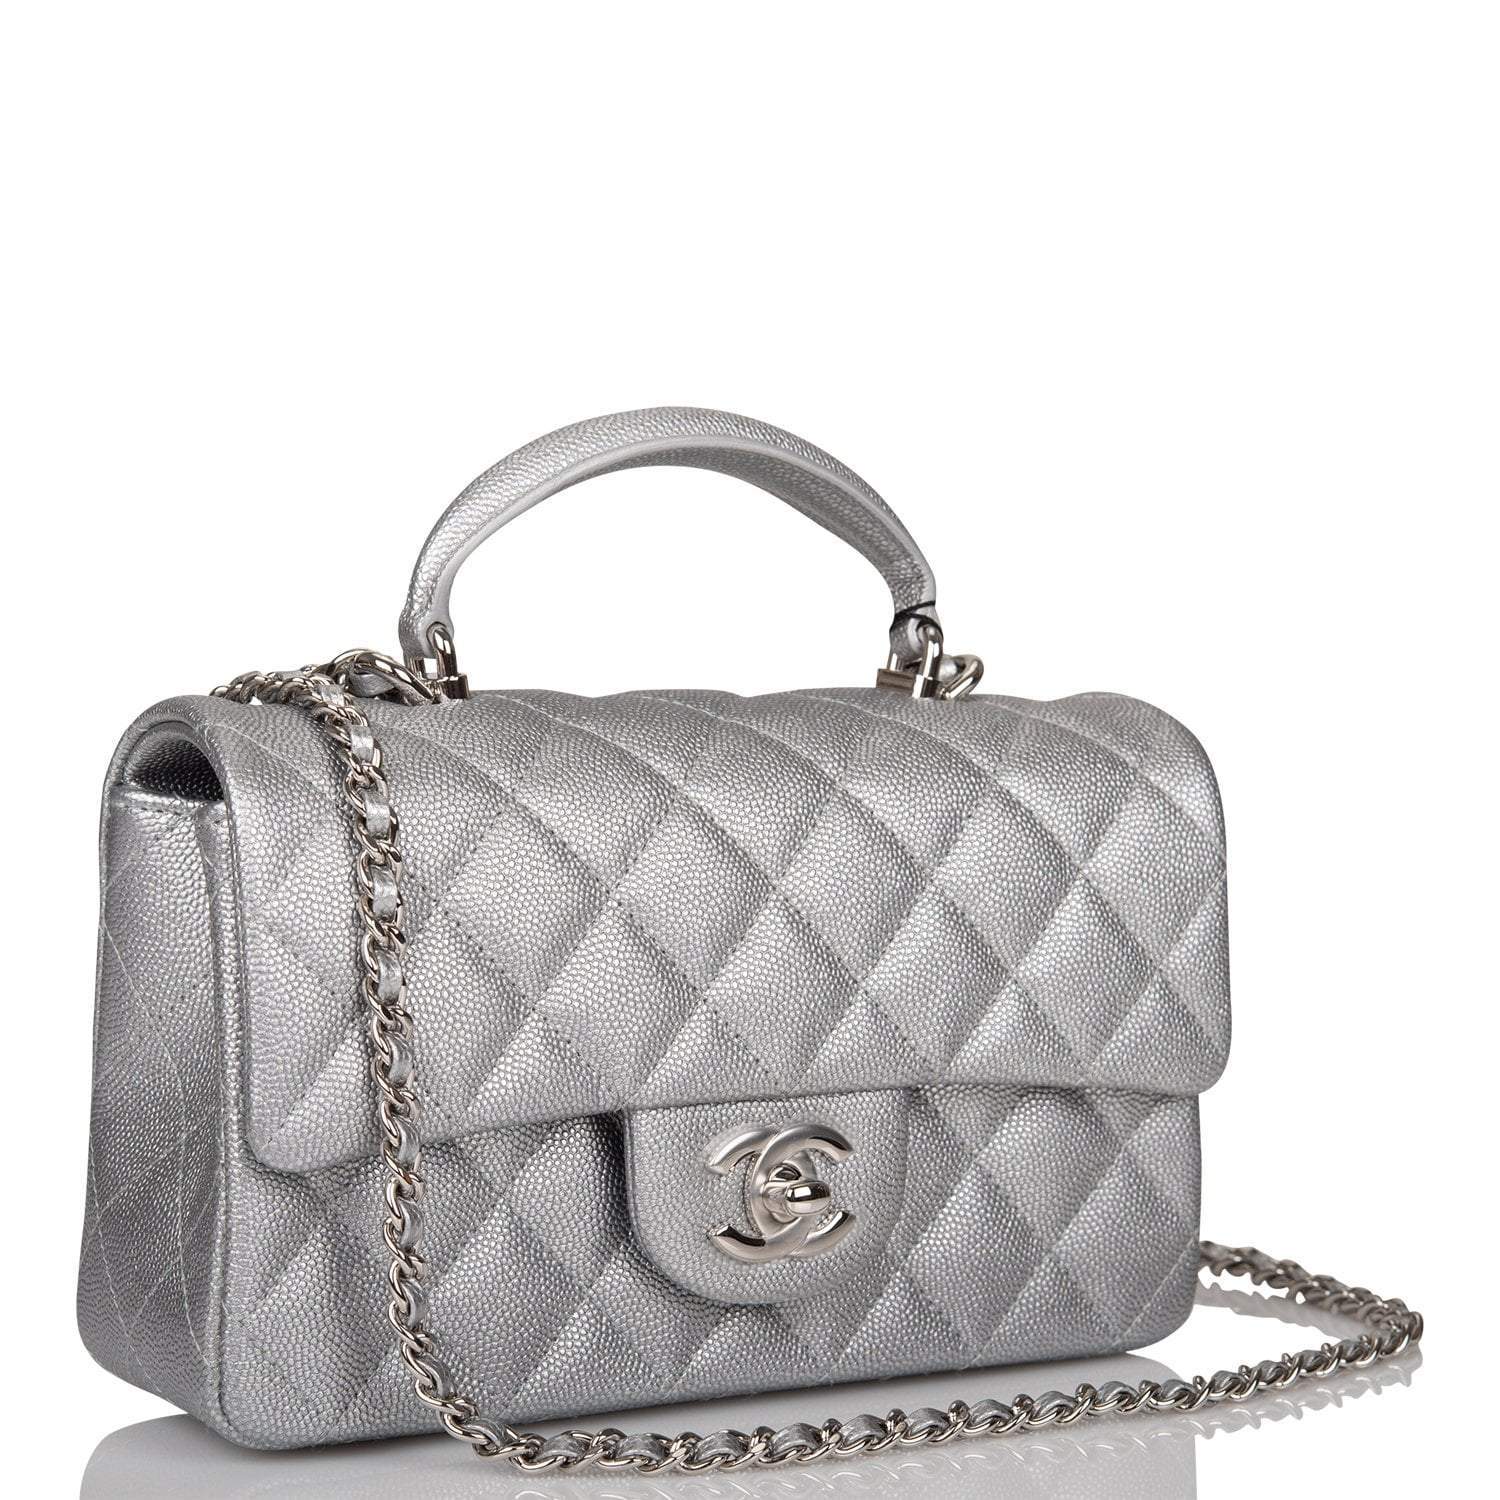 Chanel Silver Metallic Quilted Caviar Rectangular Mini Flap Bag with Top Handle Silver Hardware